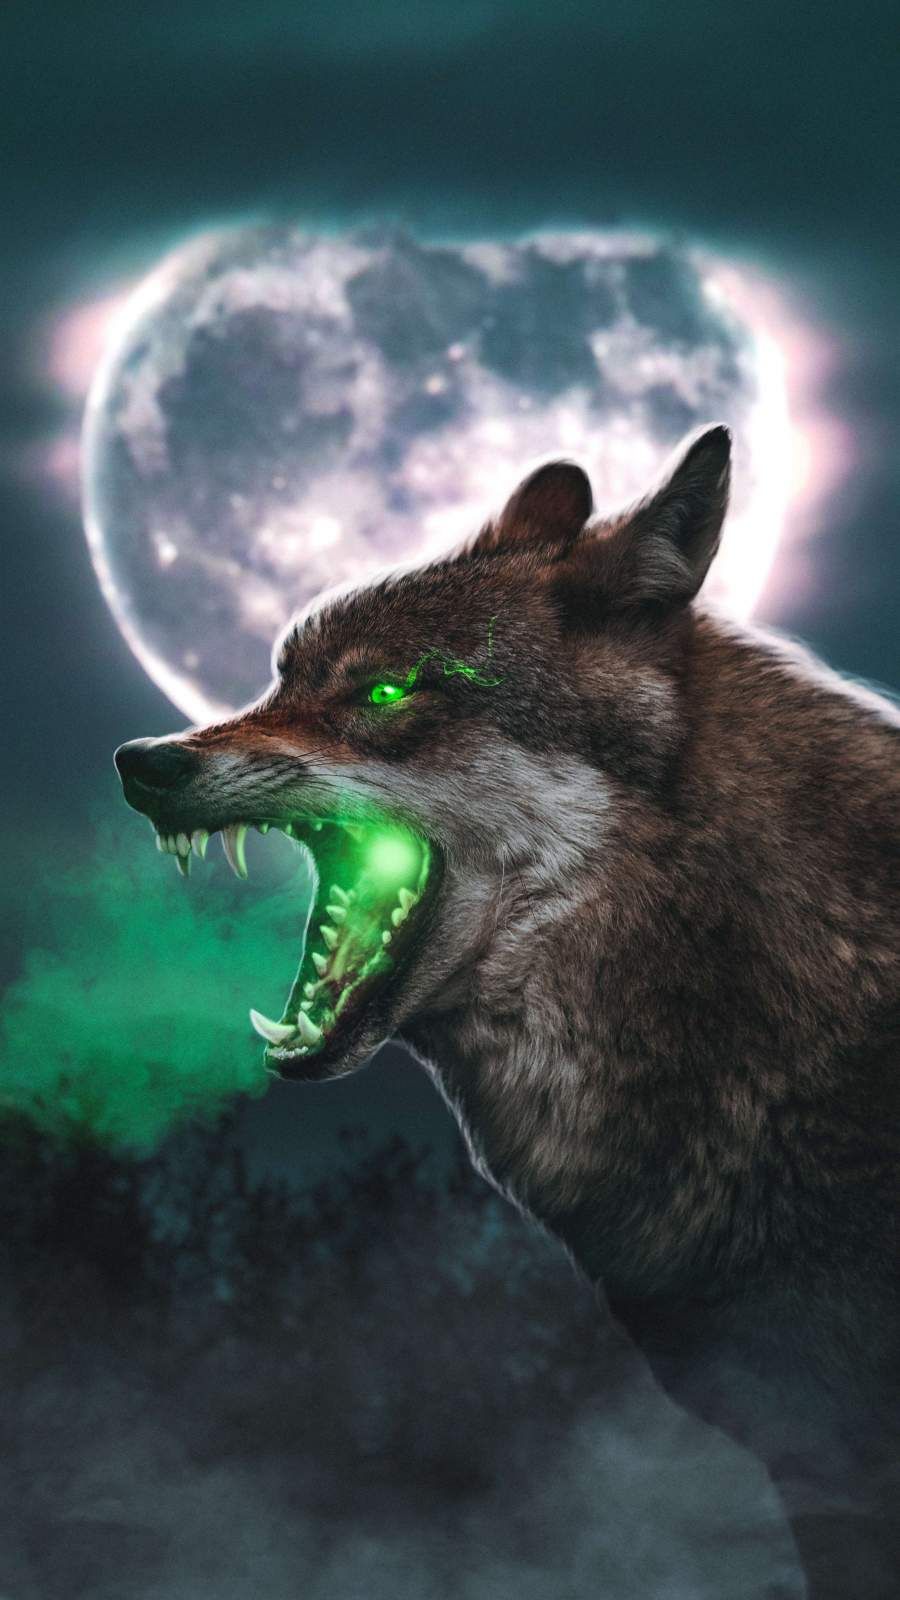 iPhone Wallpaper for iPhone iPhone iPhone X, iPhone XR, iPhone 8 Plus High Quality Wallpaper, iPad Bac. Wolf wallpaper, Animal wallpaper, Animal posters